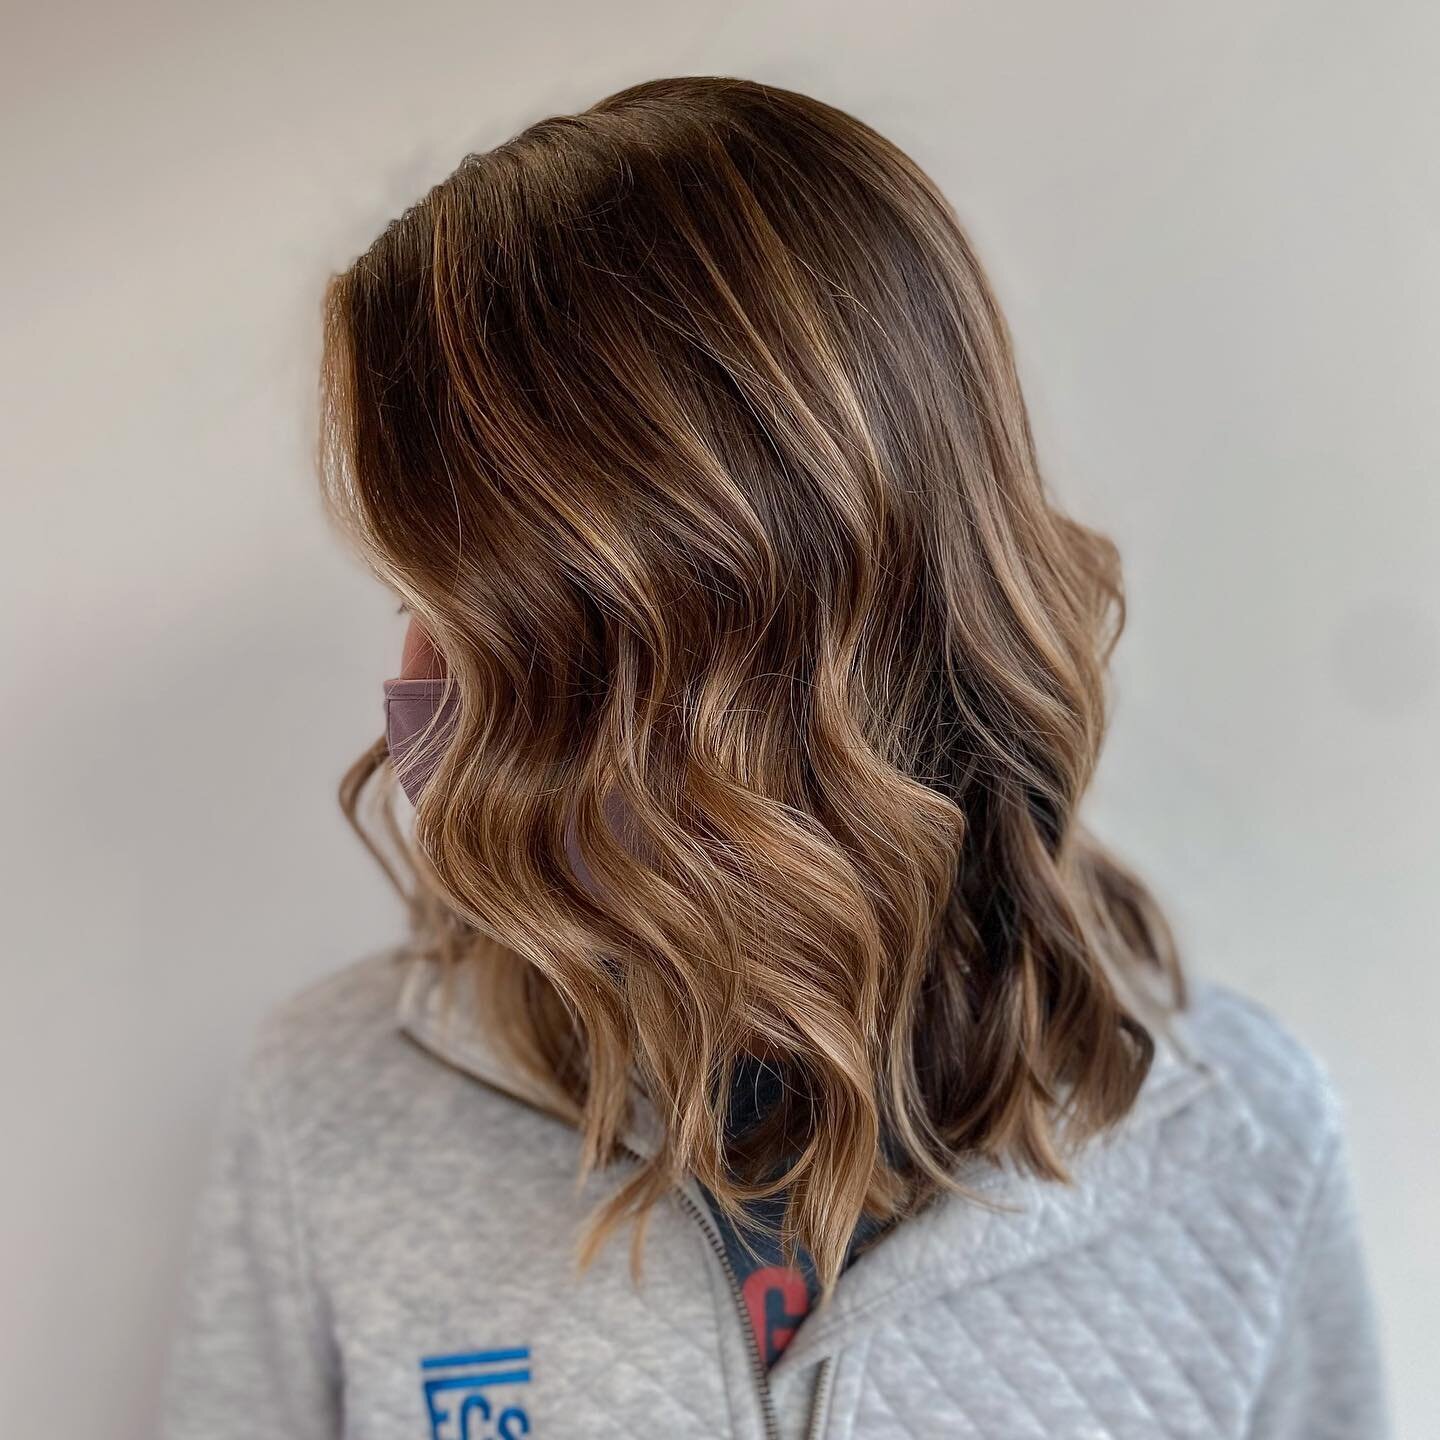 Hand-painted and dreamy ✨
.
People often ask me what my favorite thing to do with hair is. Hand-painted highlights (aka balayage) may just be that thing, though it&rsquo;s very hard to choose! I find the whole process so soothing, and I love the feel